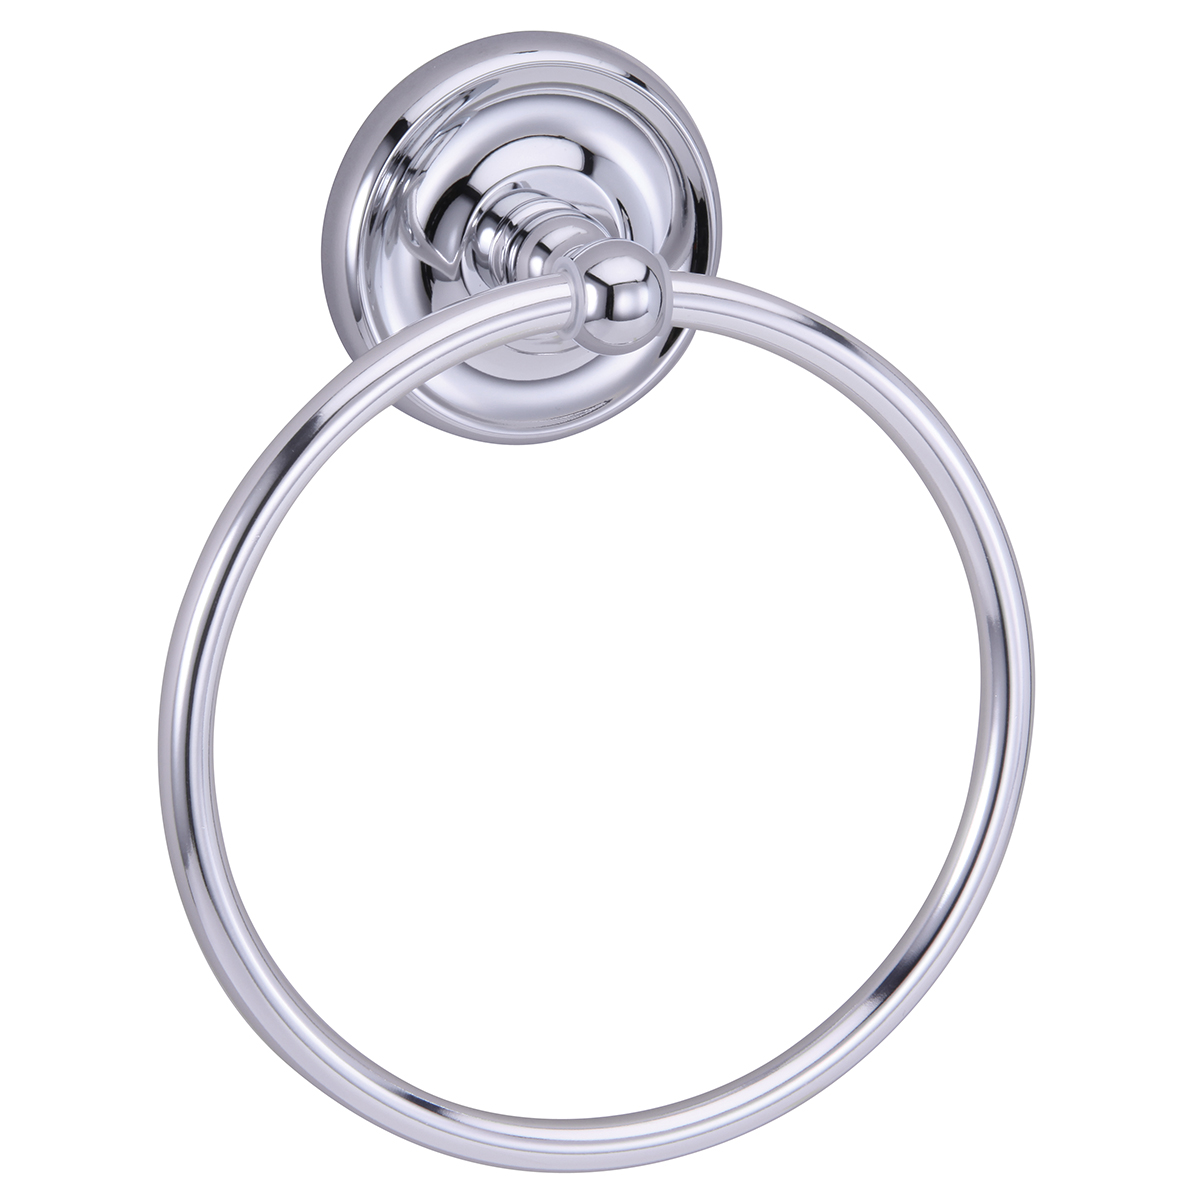 Orion - Towel Ring - Towel Ring - Polished Chrome